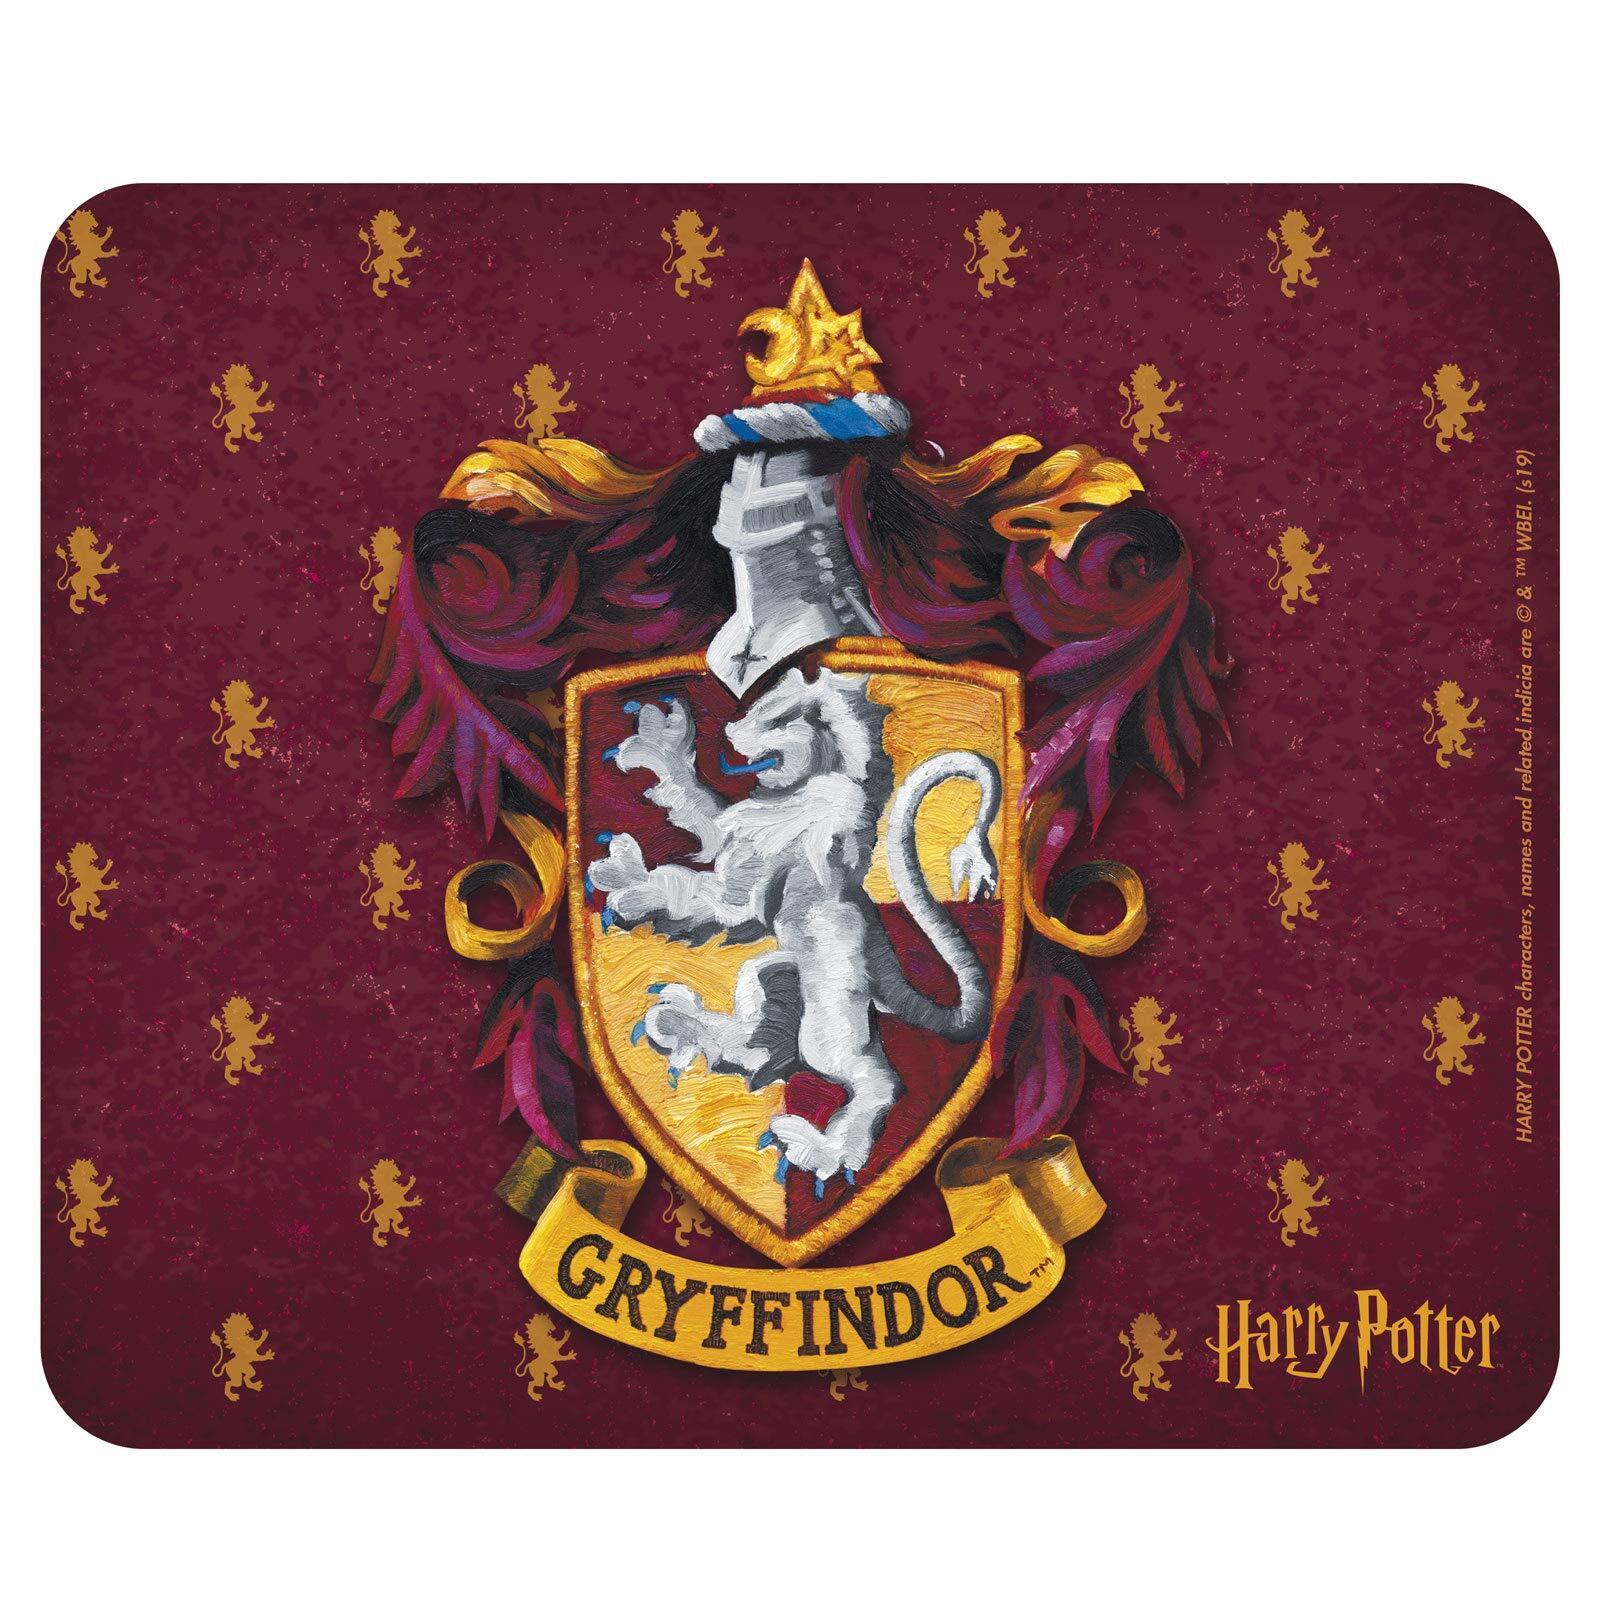 Abystyle - HARRY POTTER - Mouse pad - Gryffindor, Multicolor